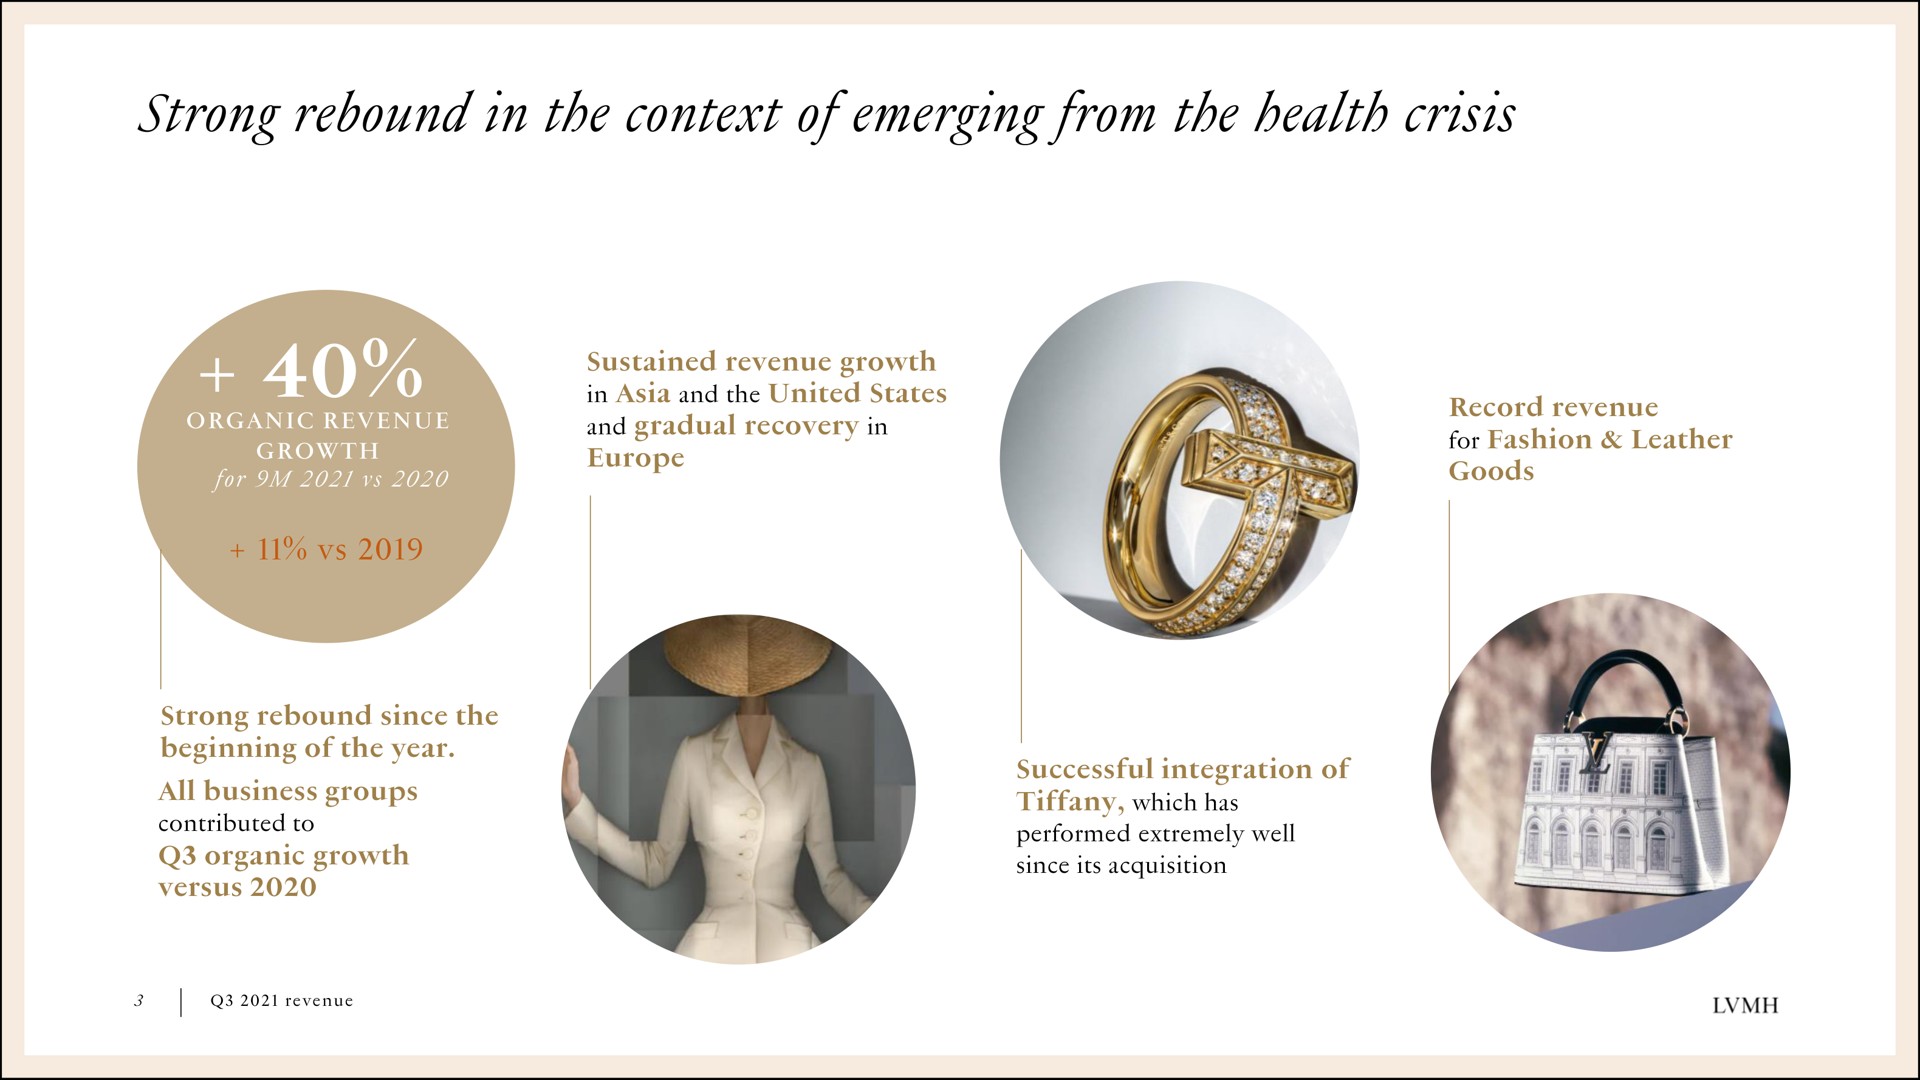 strong rebound in the context of emerging from the health crisis | LVMH